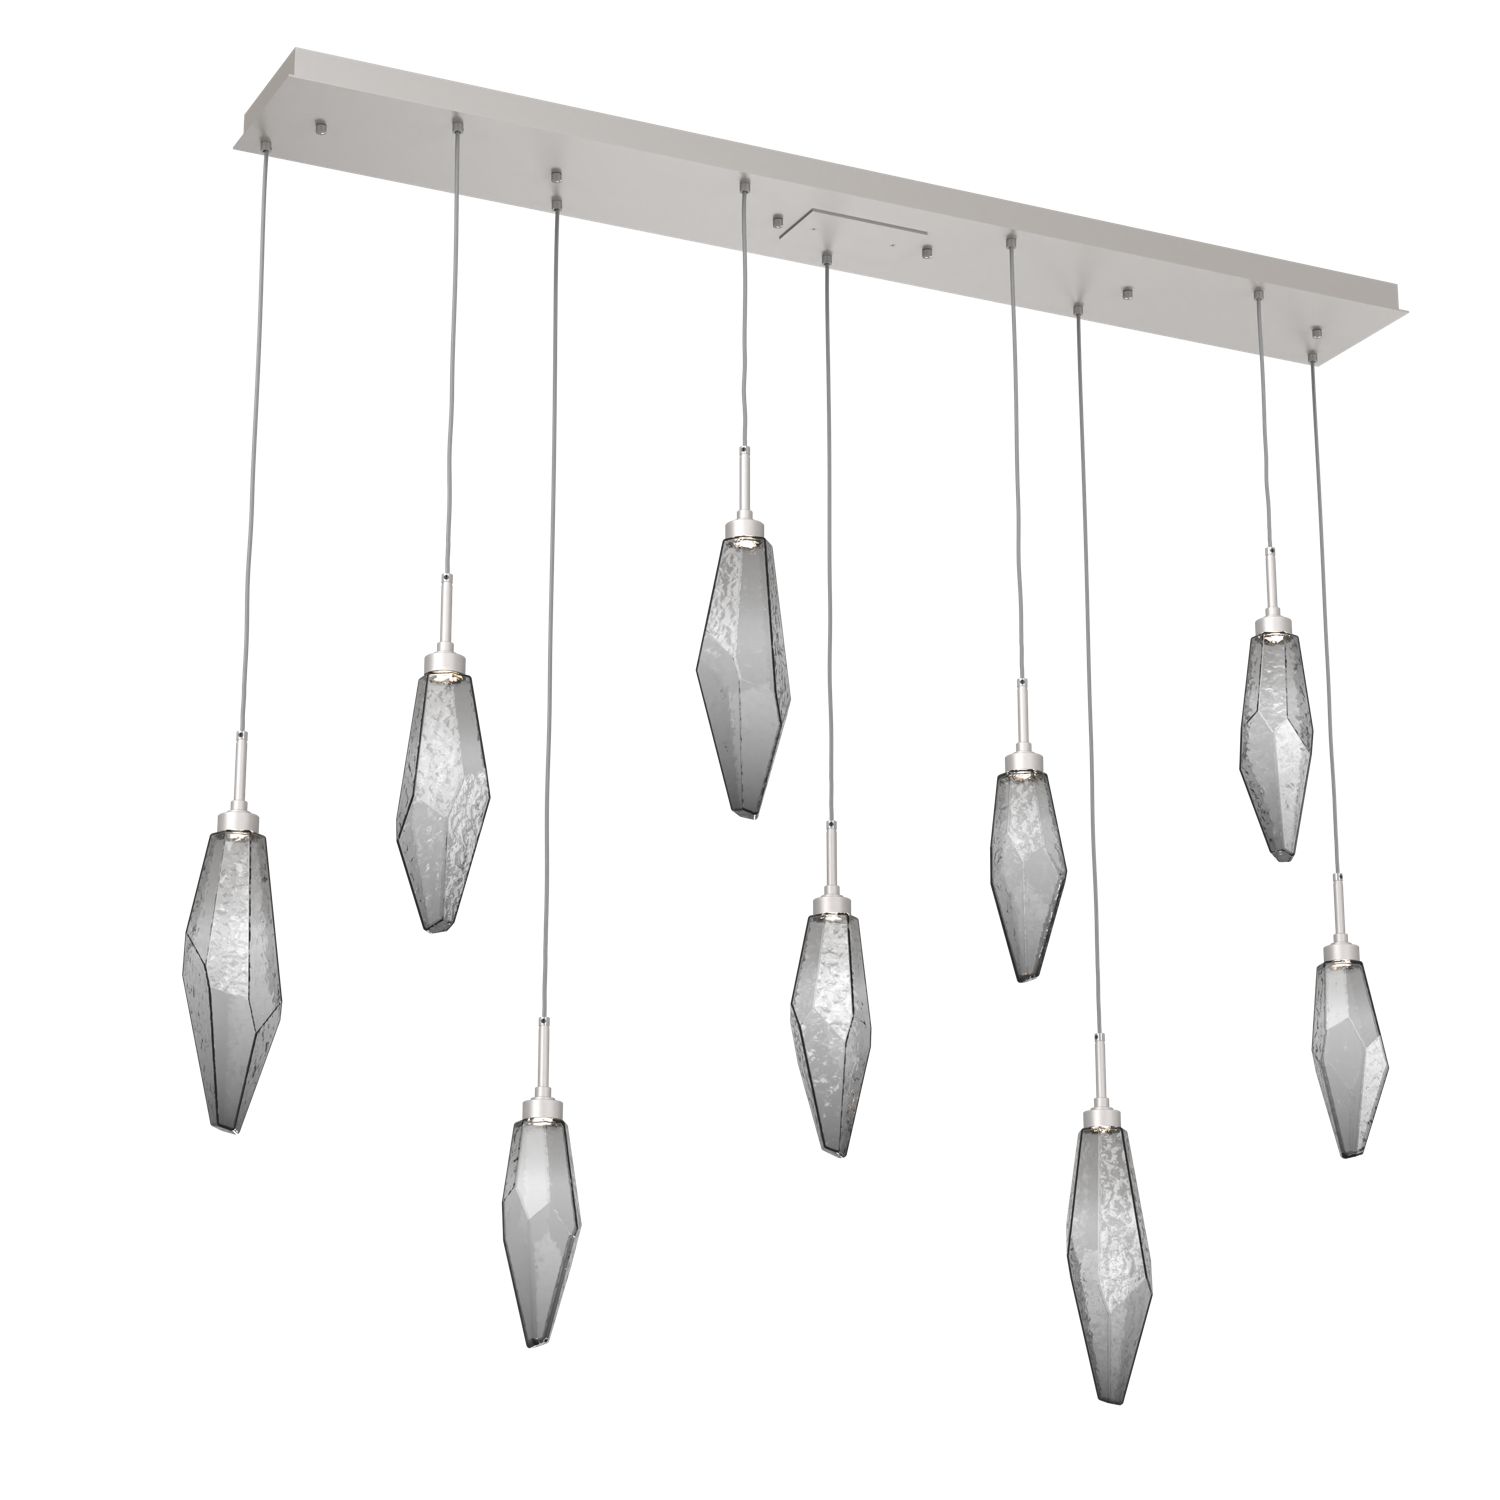 PLB0050-09-BS-CS-Hammerton-Studio-Rock-Crystal-9-light-linear-pendant-chandelier-with-beige-silver-finish-and-chilled-smoke-glass-shades-and-LED-lamping